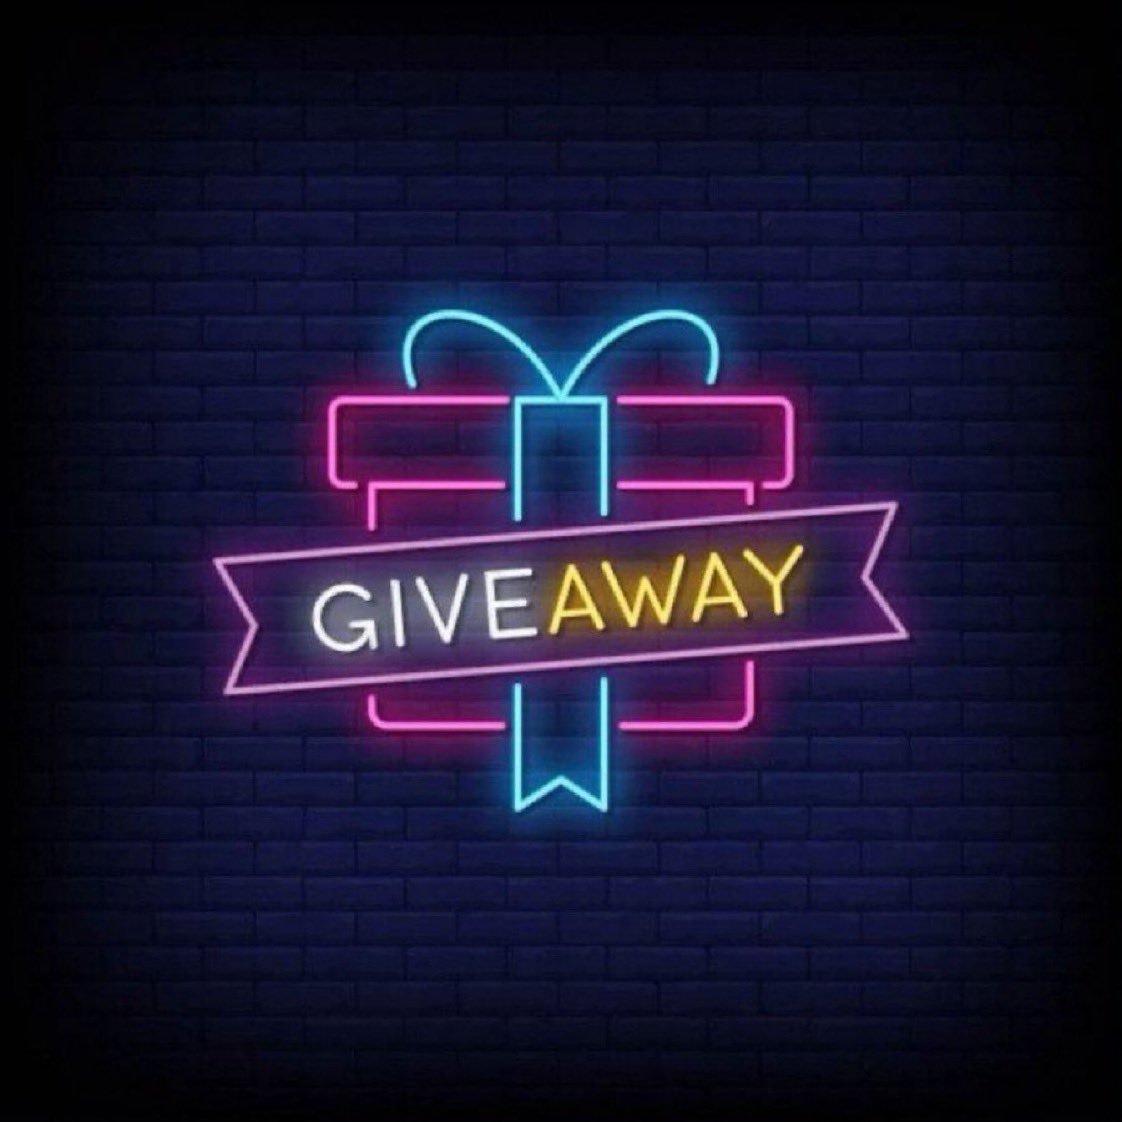 $60 for 3 active winners Giveaway team!🎁 - ⁠Follow, Repost, tag 2 friends and comment usdt trc20 address. - Follow @NastiaVox - ⁠Winners will be announced on Monday! Best of luck😘